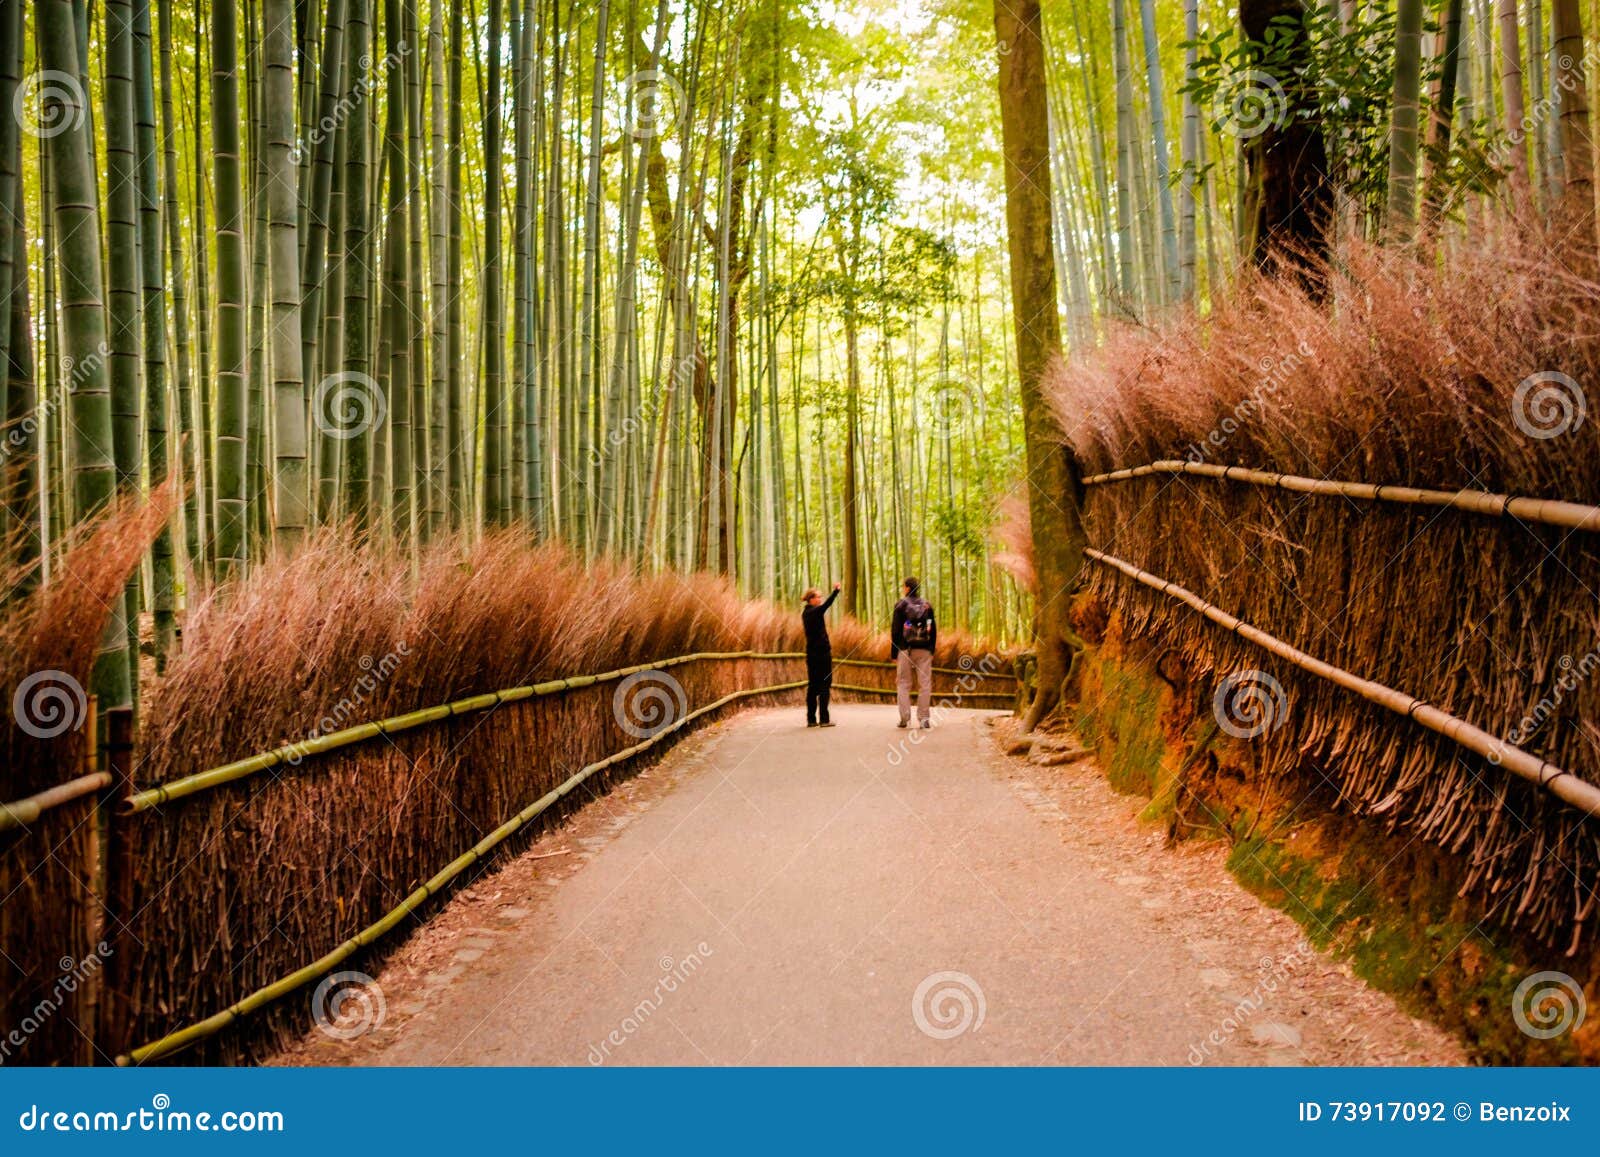 Kyoto Japan November 12 The Path To Bamboo Forest In Kyoto Editorial Photography Image Of Bright Path